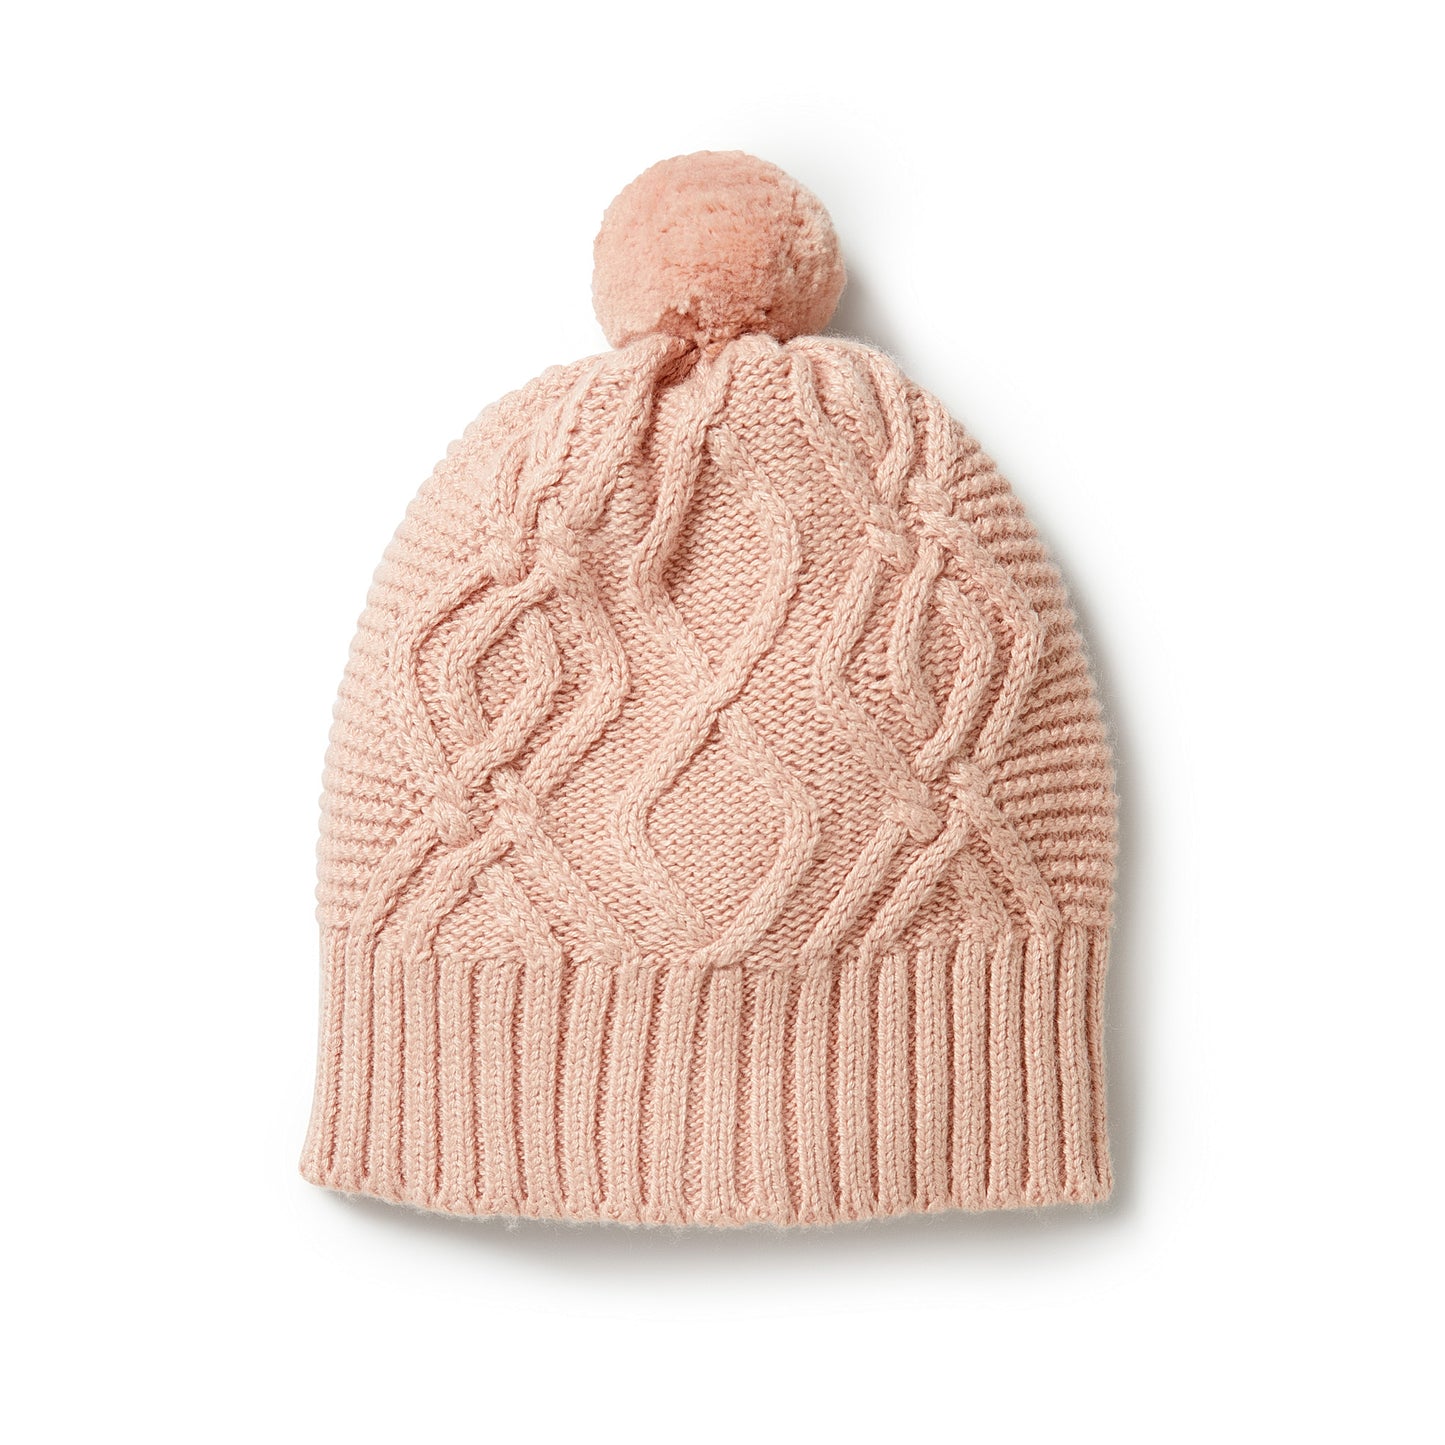 Knit Hat in Rose Cable